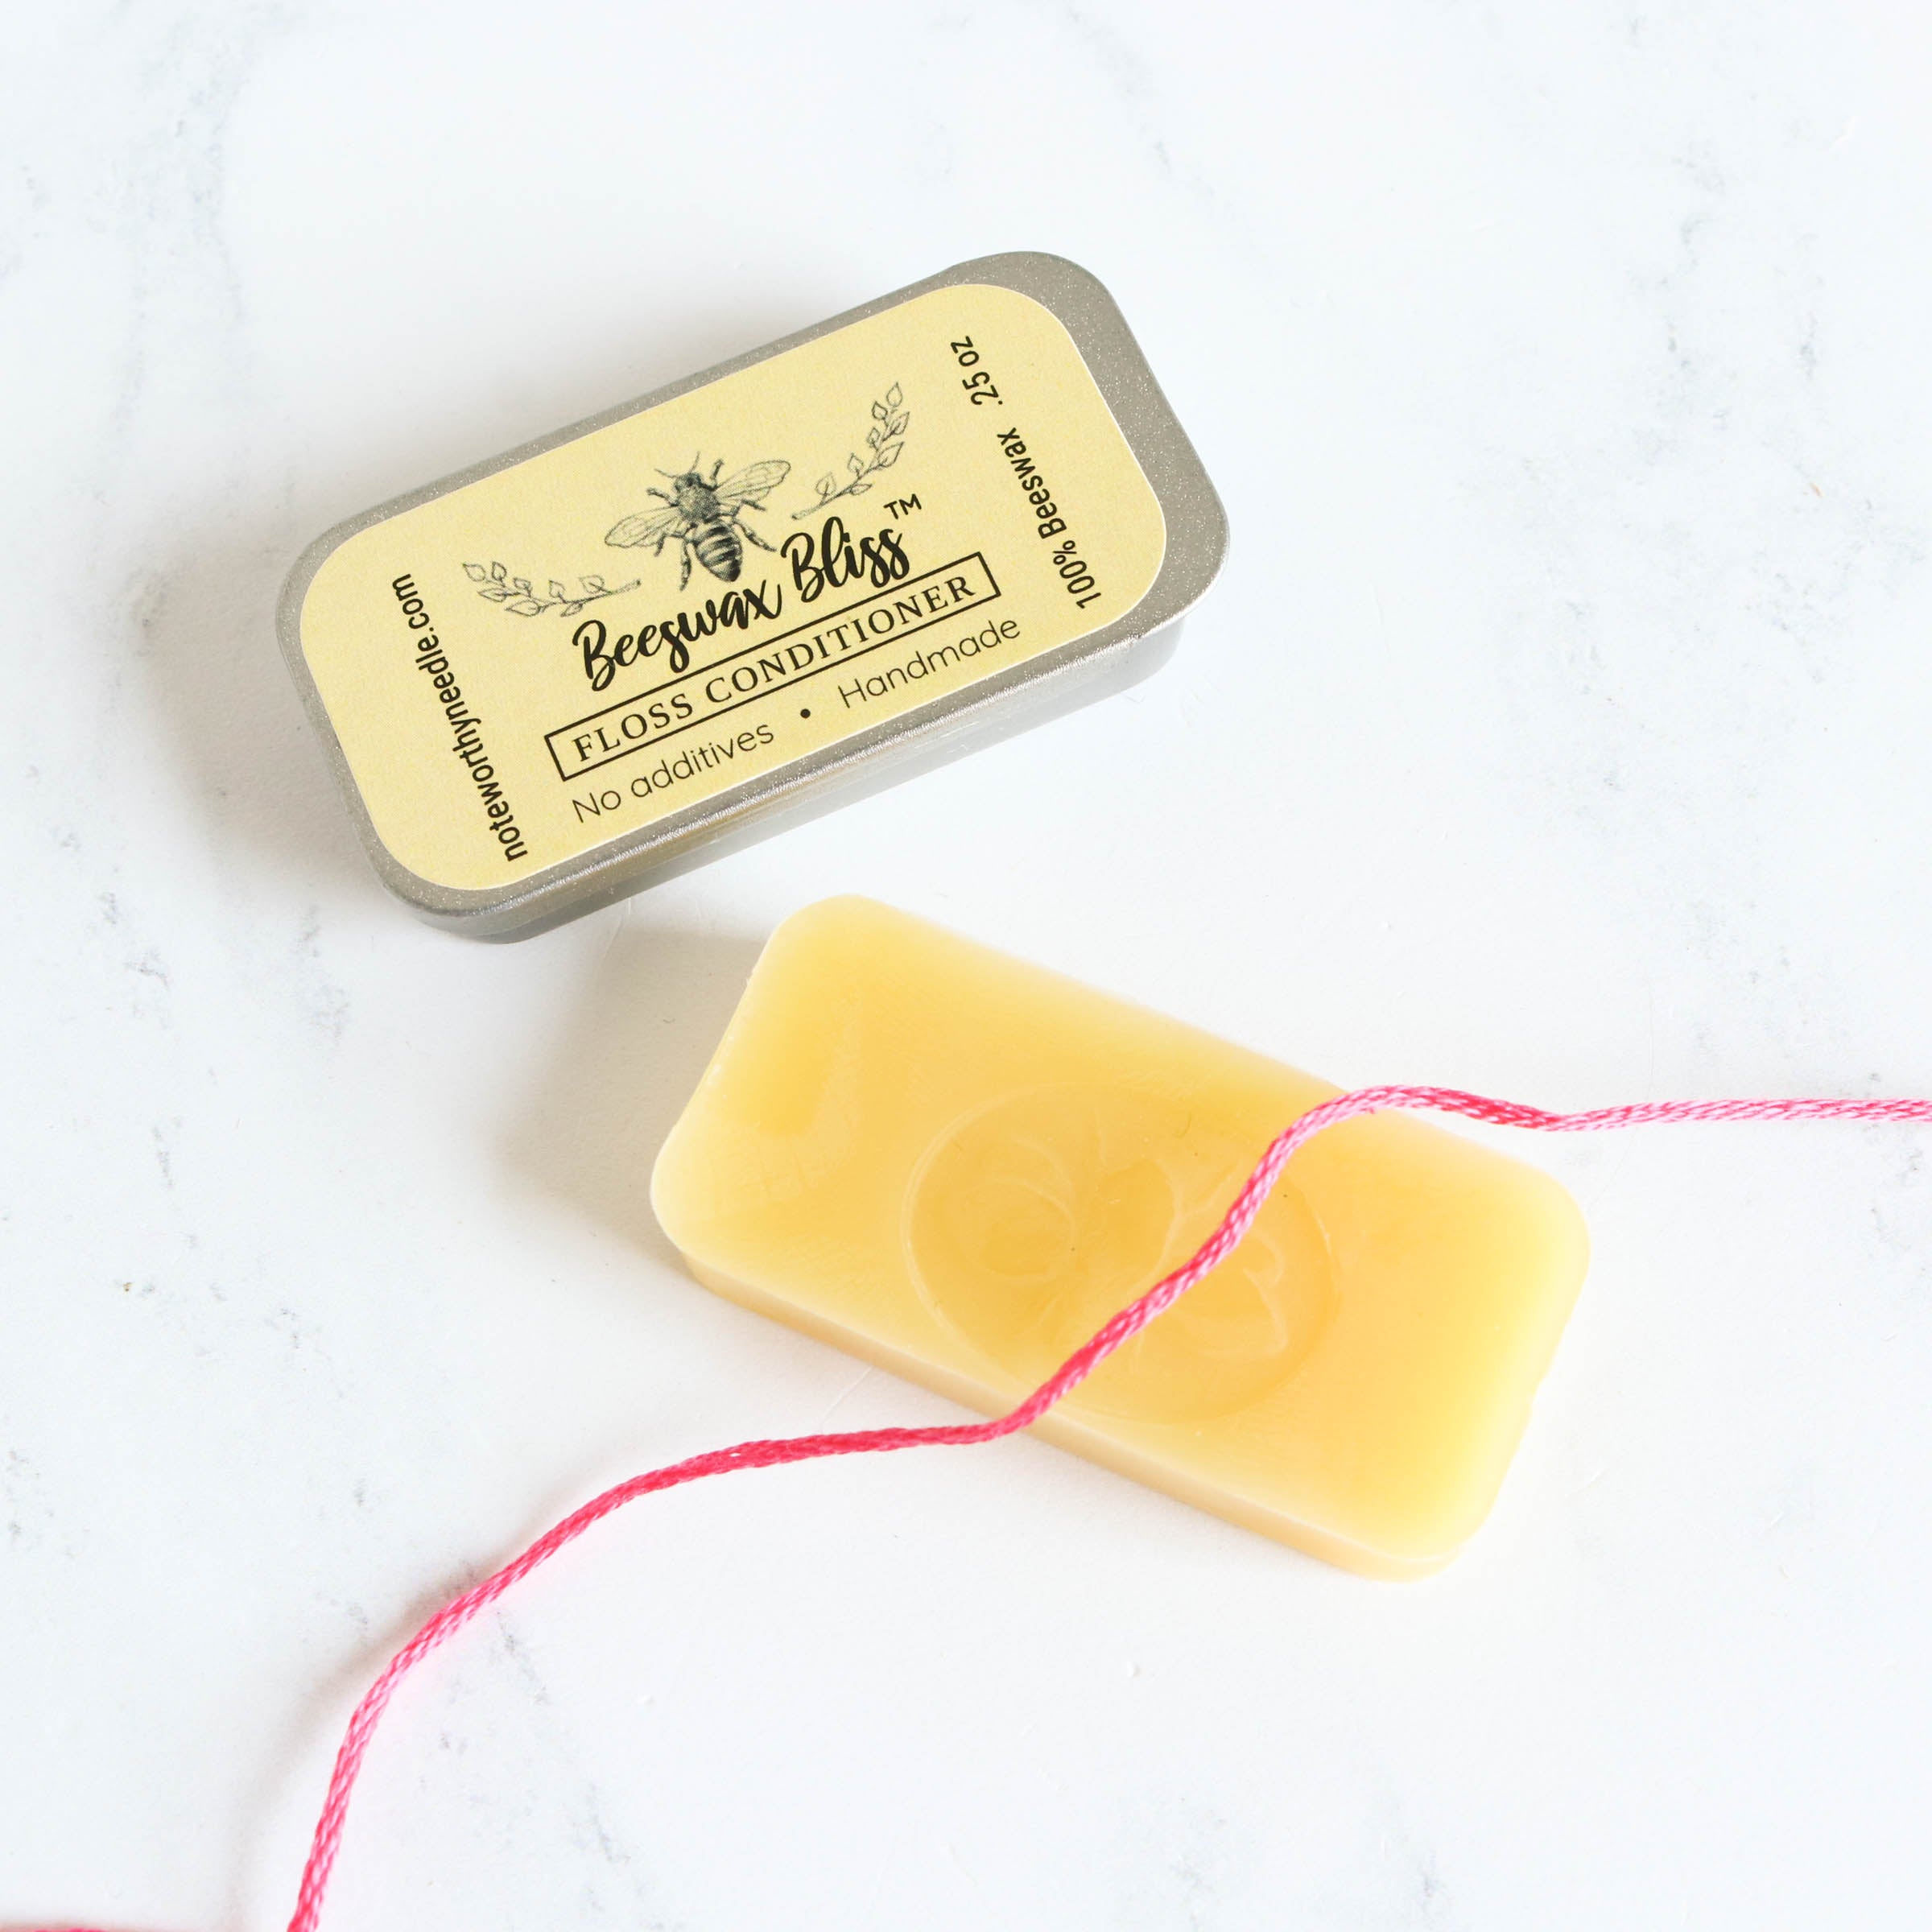 How to Make Beeswax Thread Conditioning Bars for Sewing 